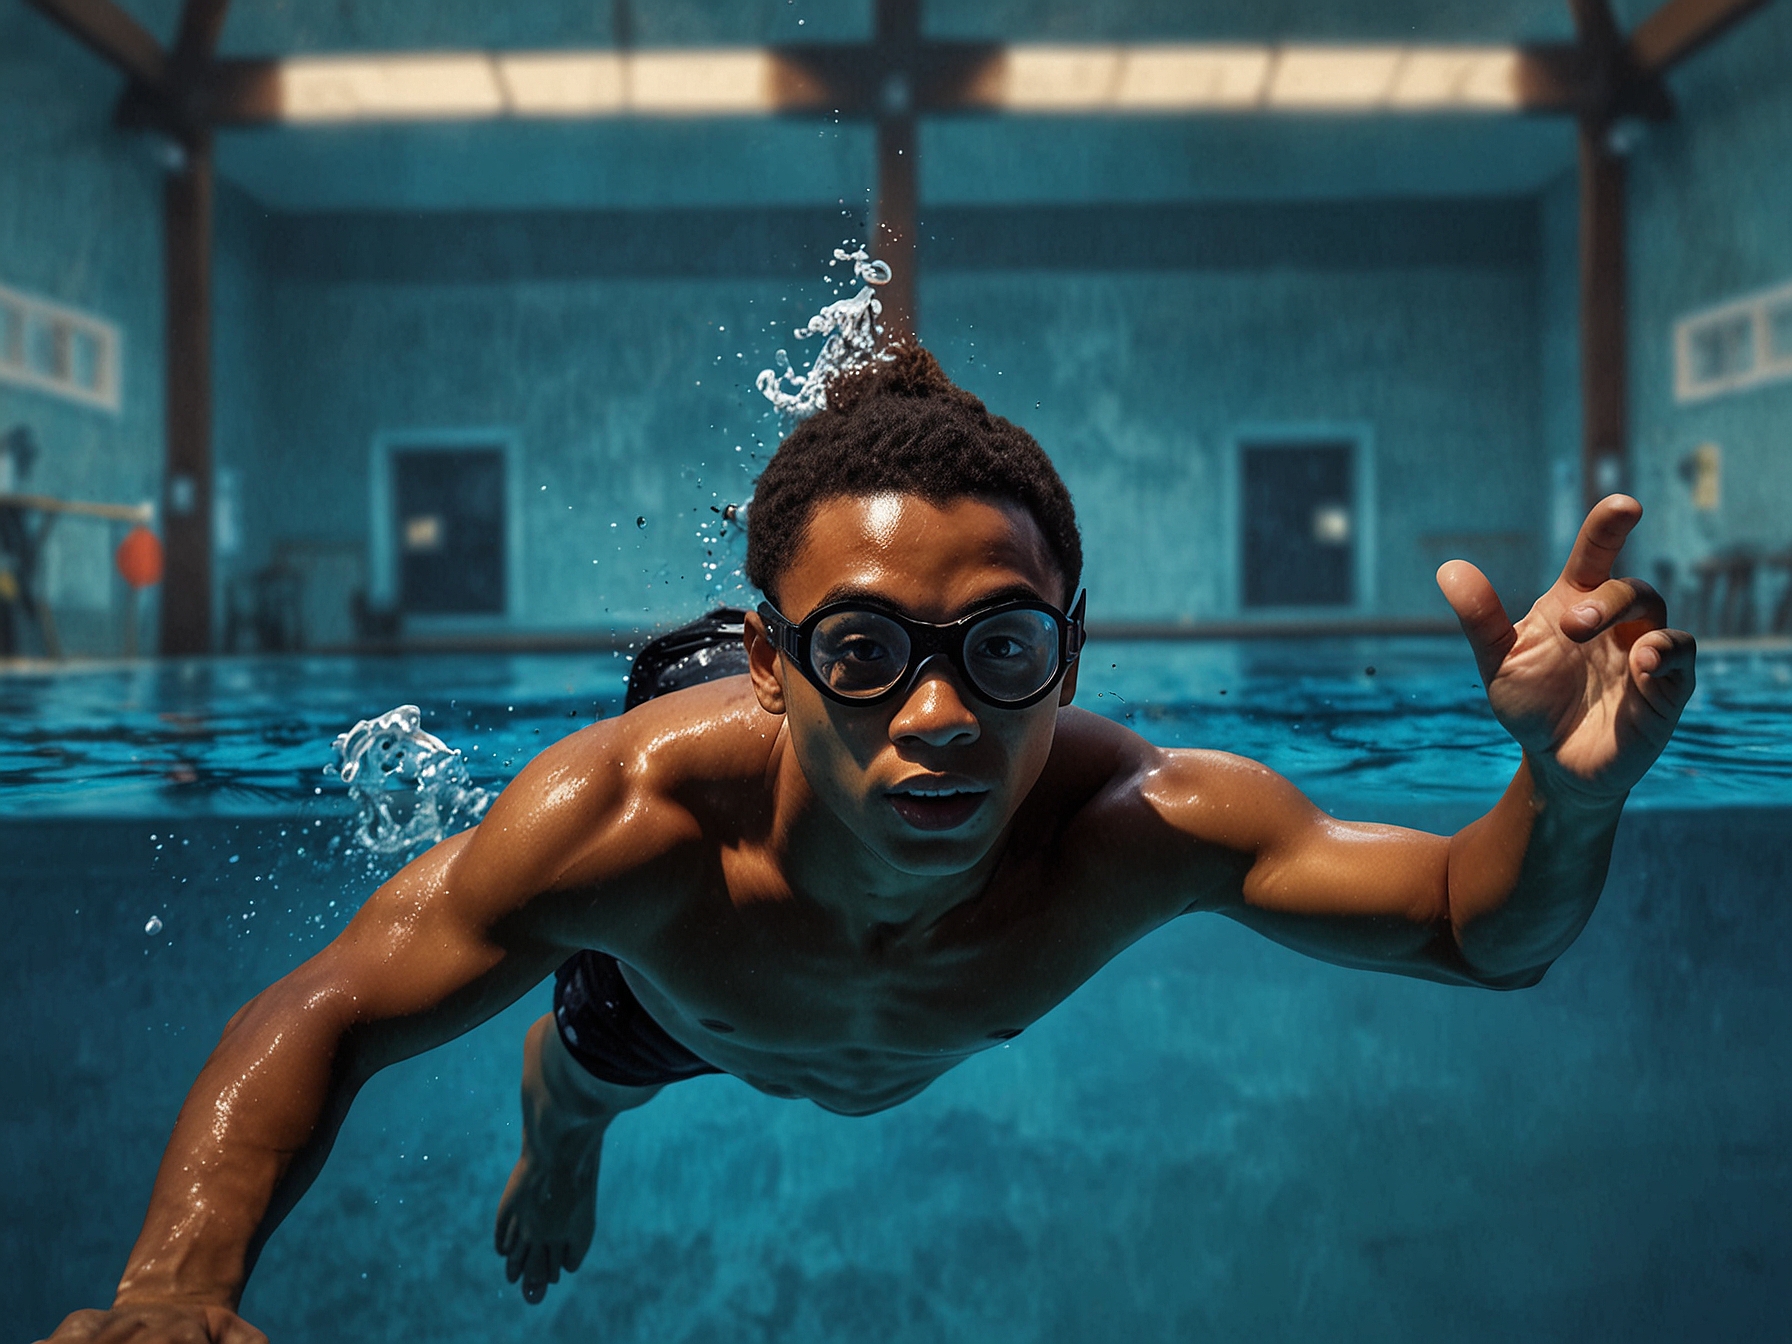 A photo of JJ Rice, the 18-year-old diver from Tonga, passionately diving into a pool. His focused expression captures his dedication and skill, symbolizing his promising future in the sport.